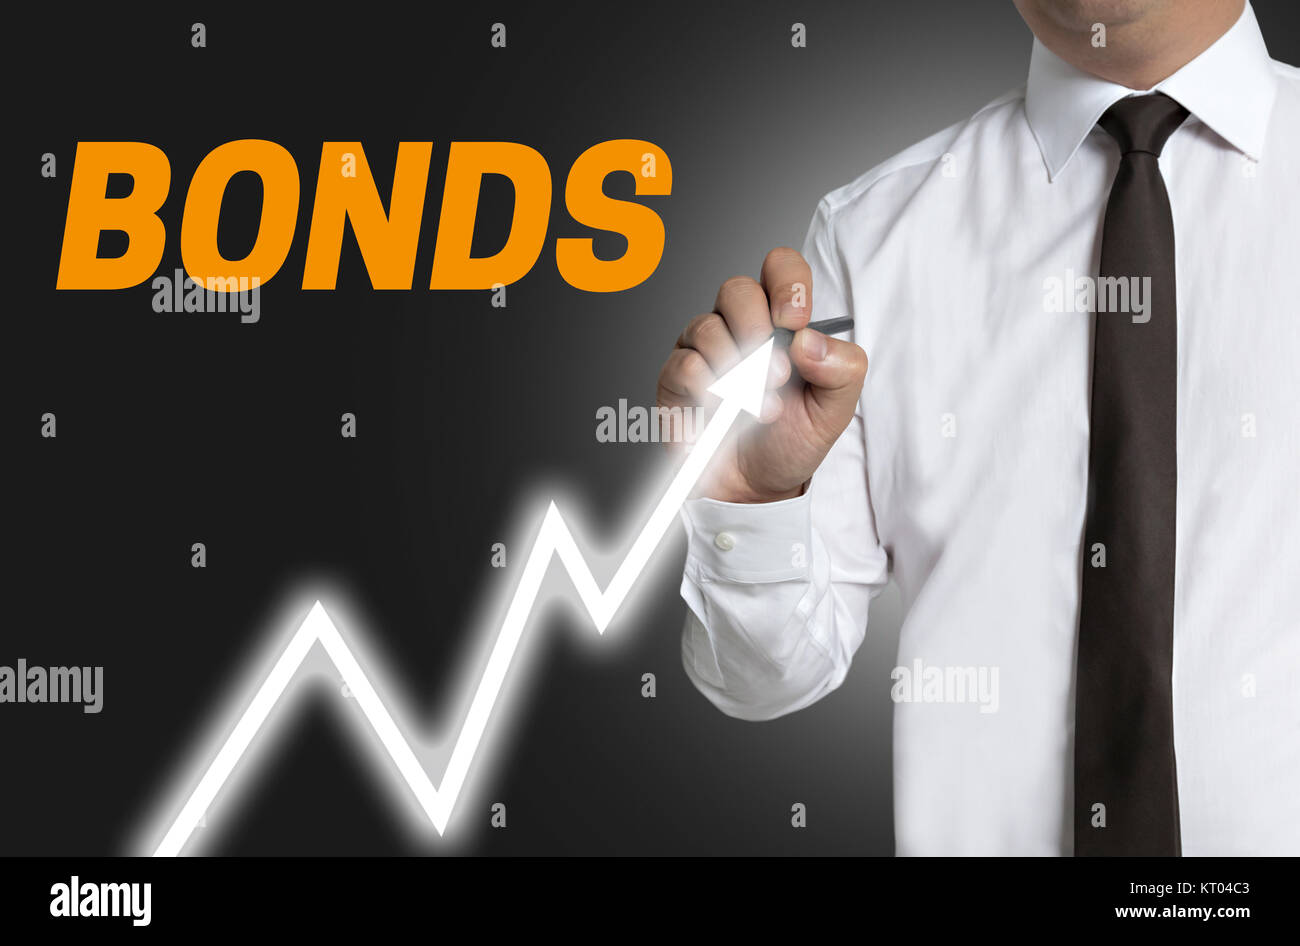 bonds trader signs stock exchange on touchscreen Stock Photo